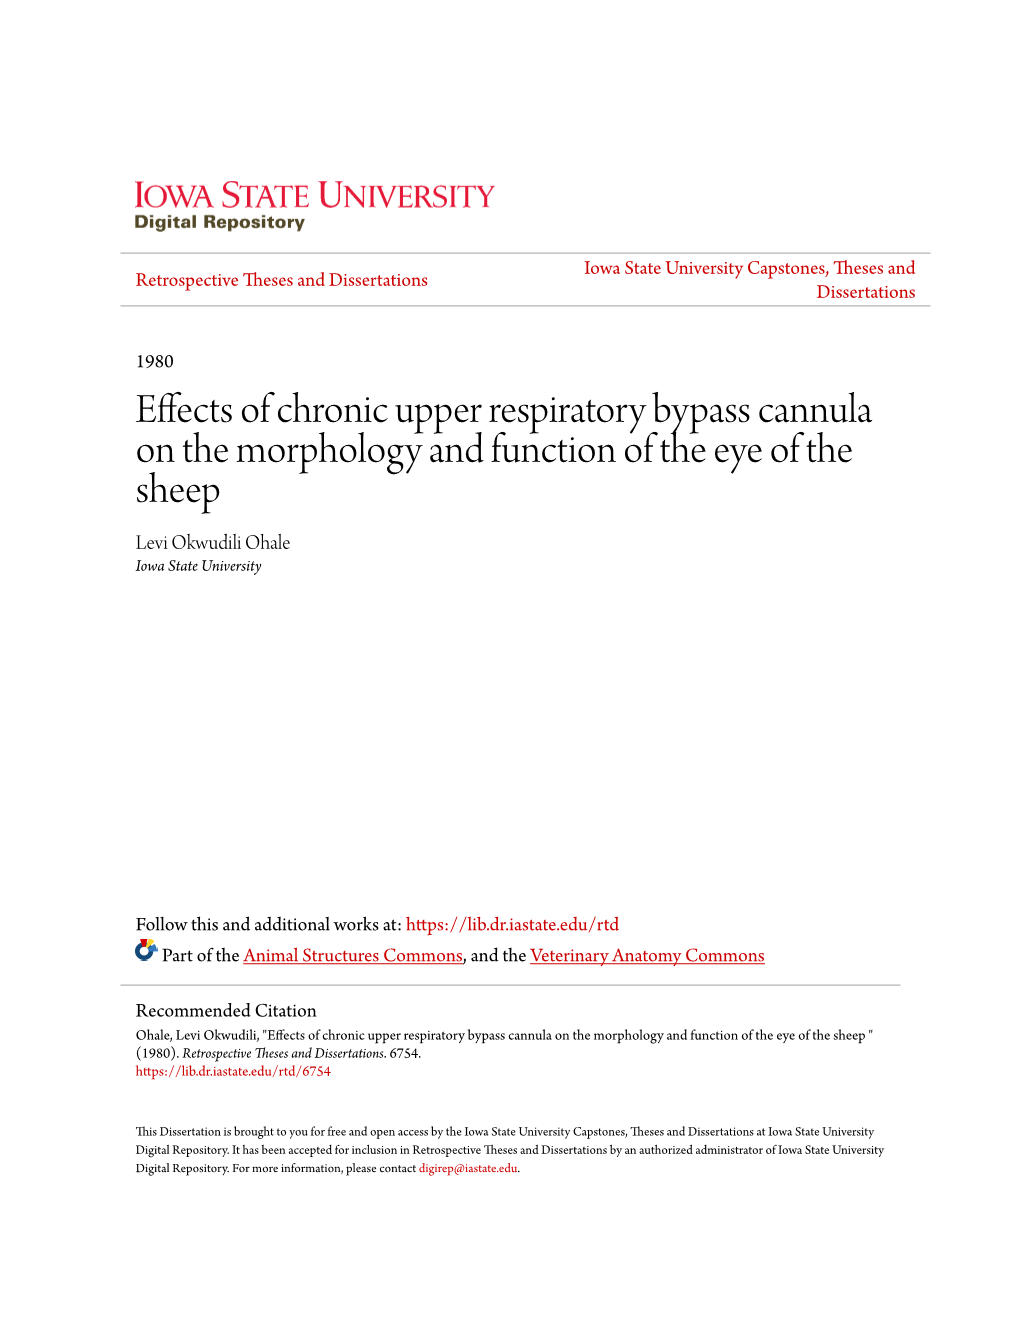 Effects of Chronic Upper Respiratory Bypass Cannula on the Morphology and Function of the Eye of the Sheep Levi Okwudili Ohale Iowa State University